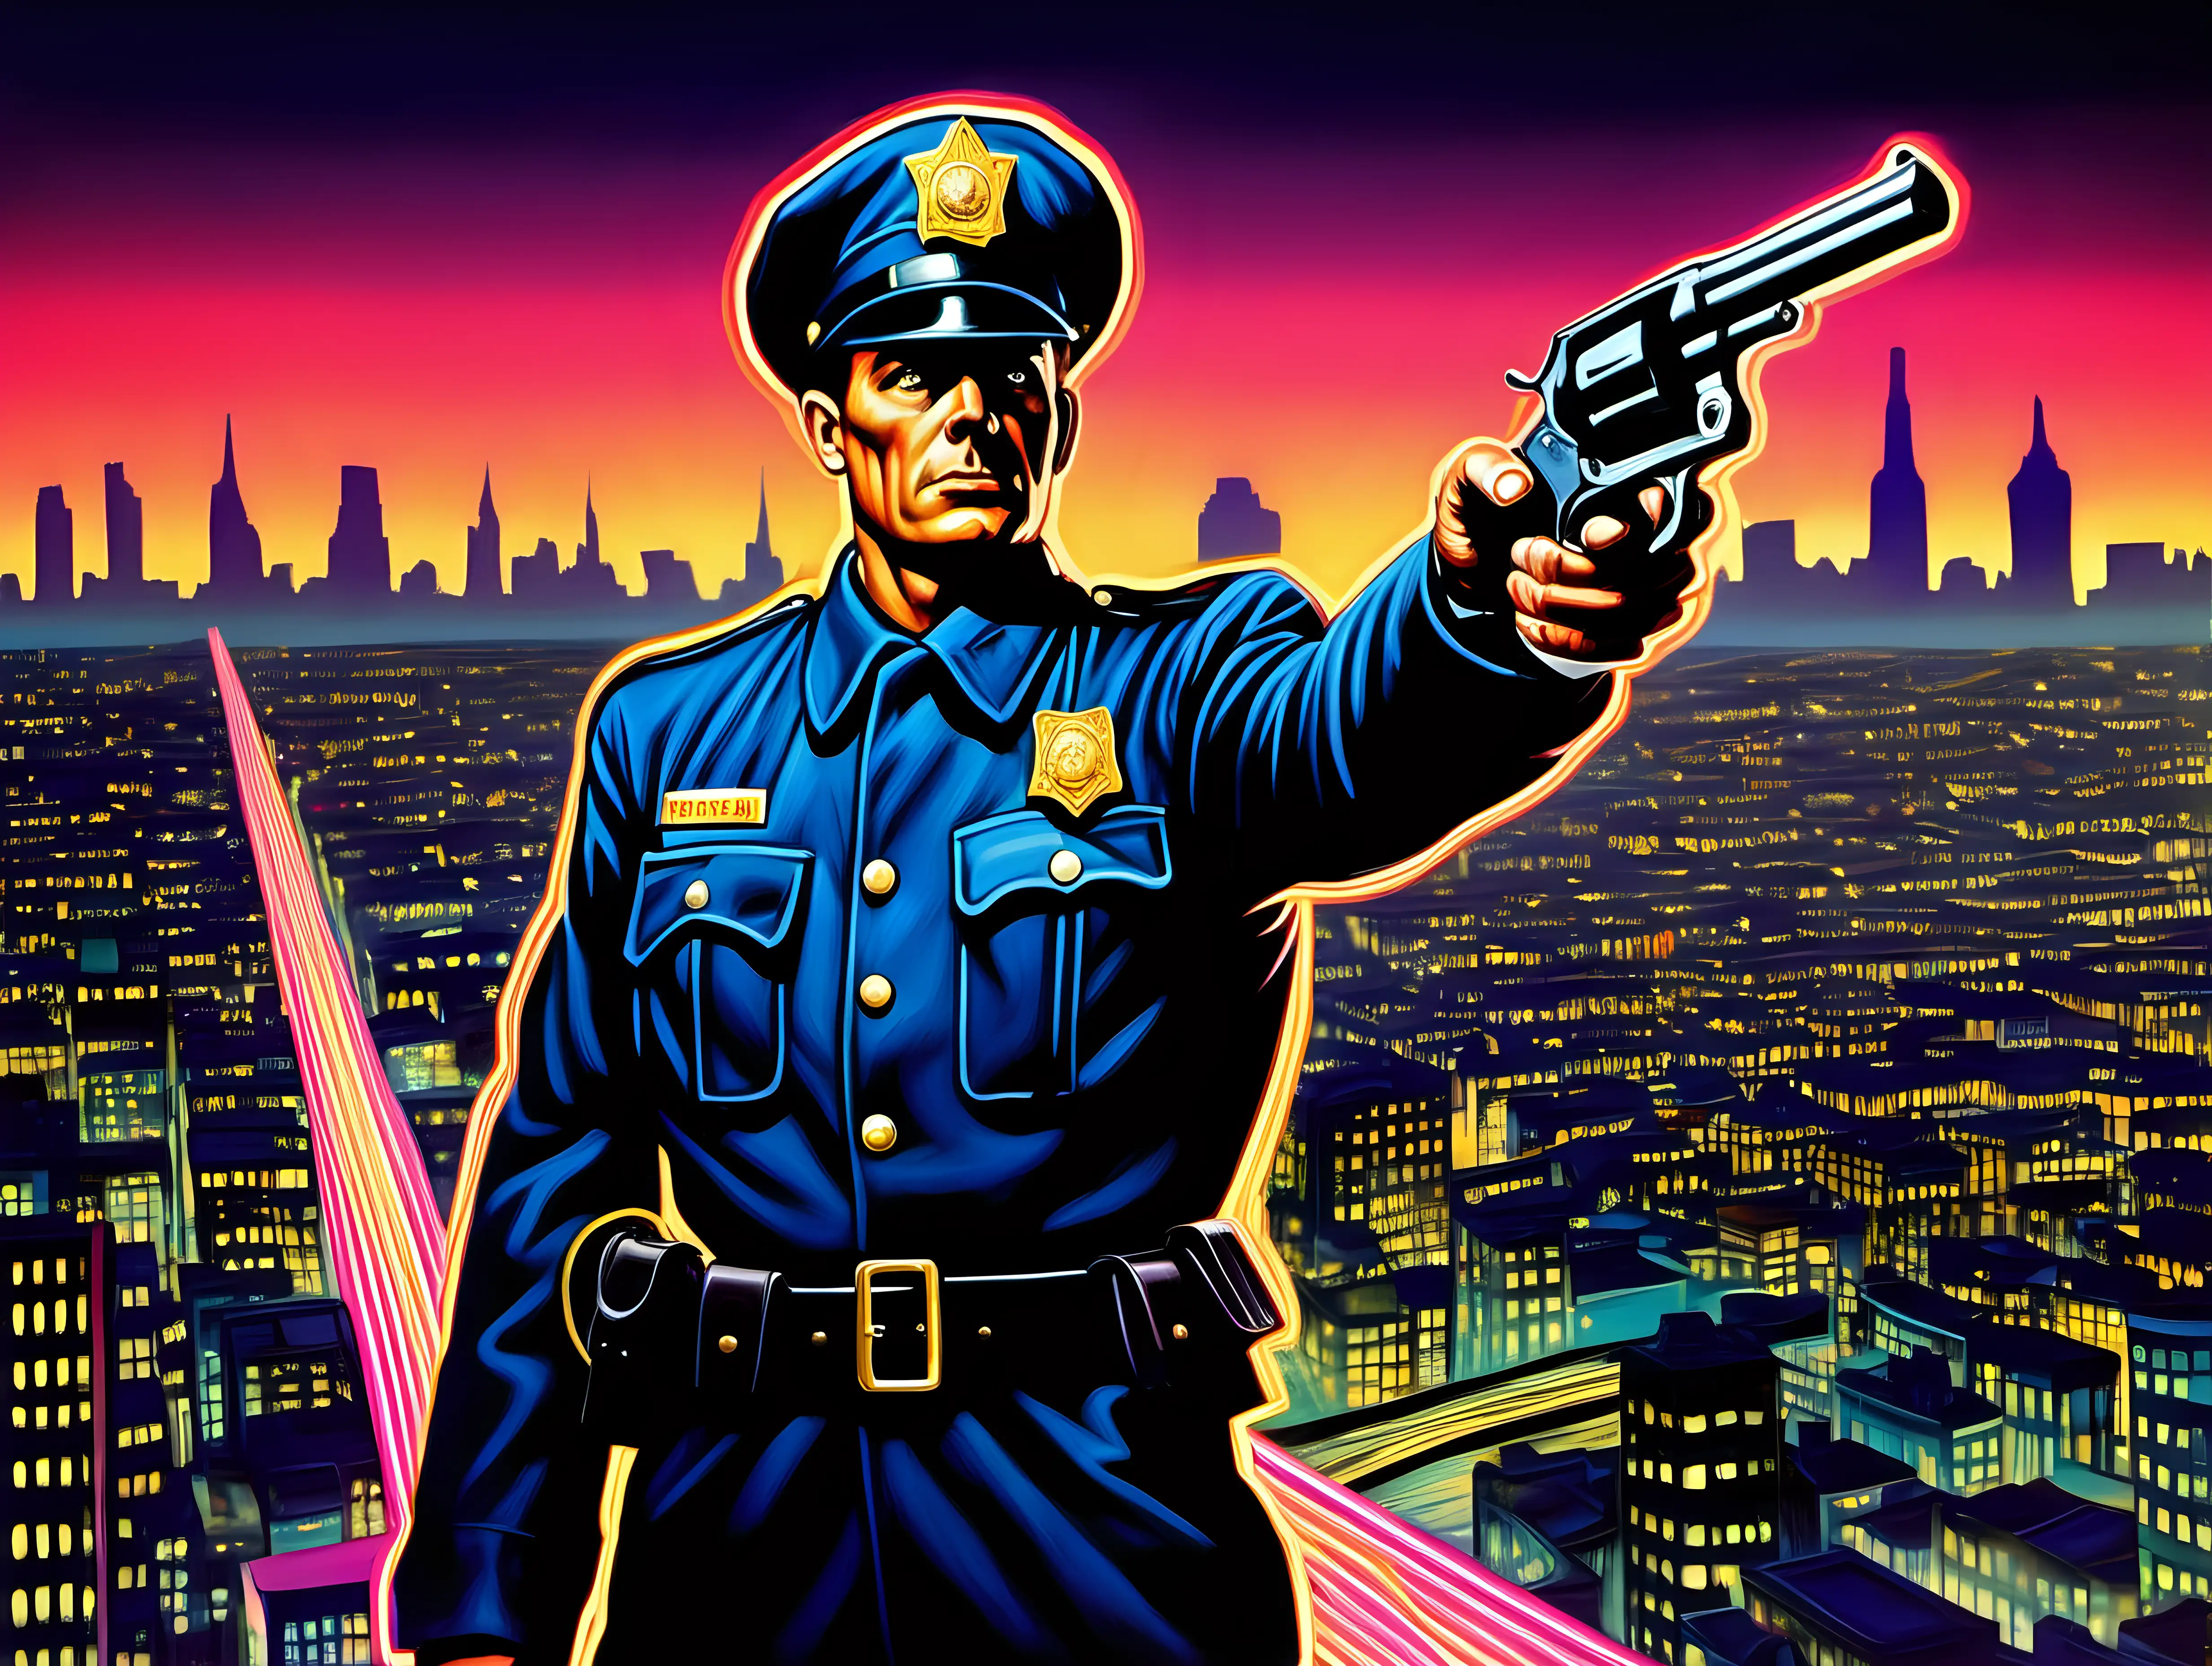 1940s Policeman with Revolver Overlooking Neon City at Twilight